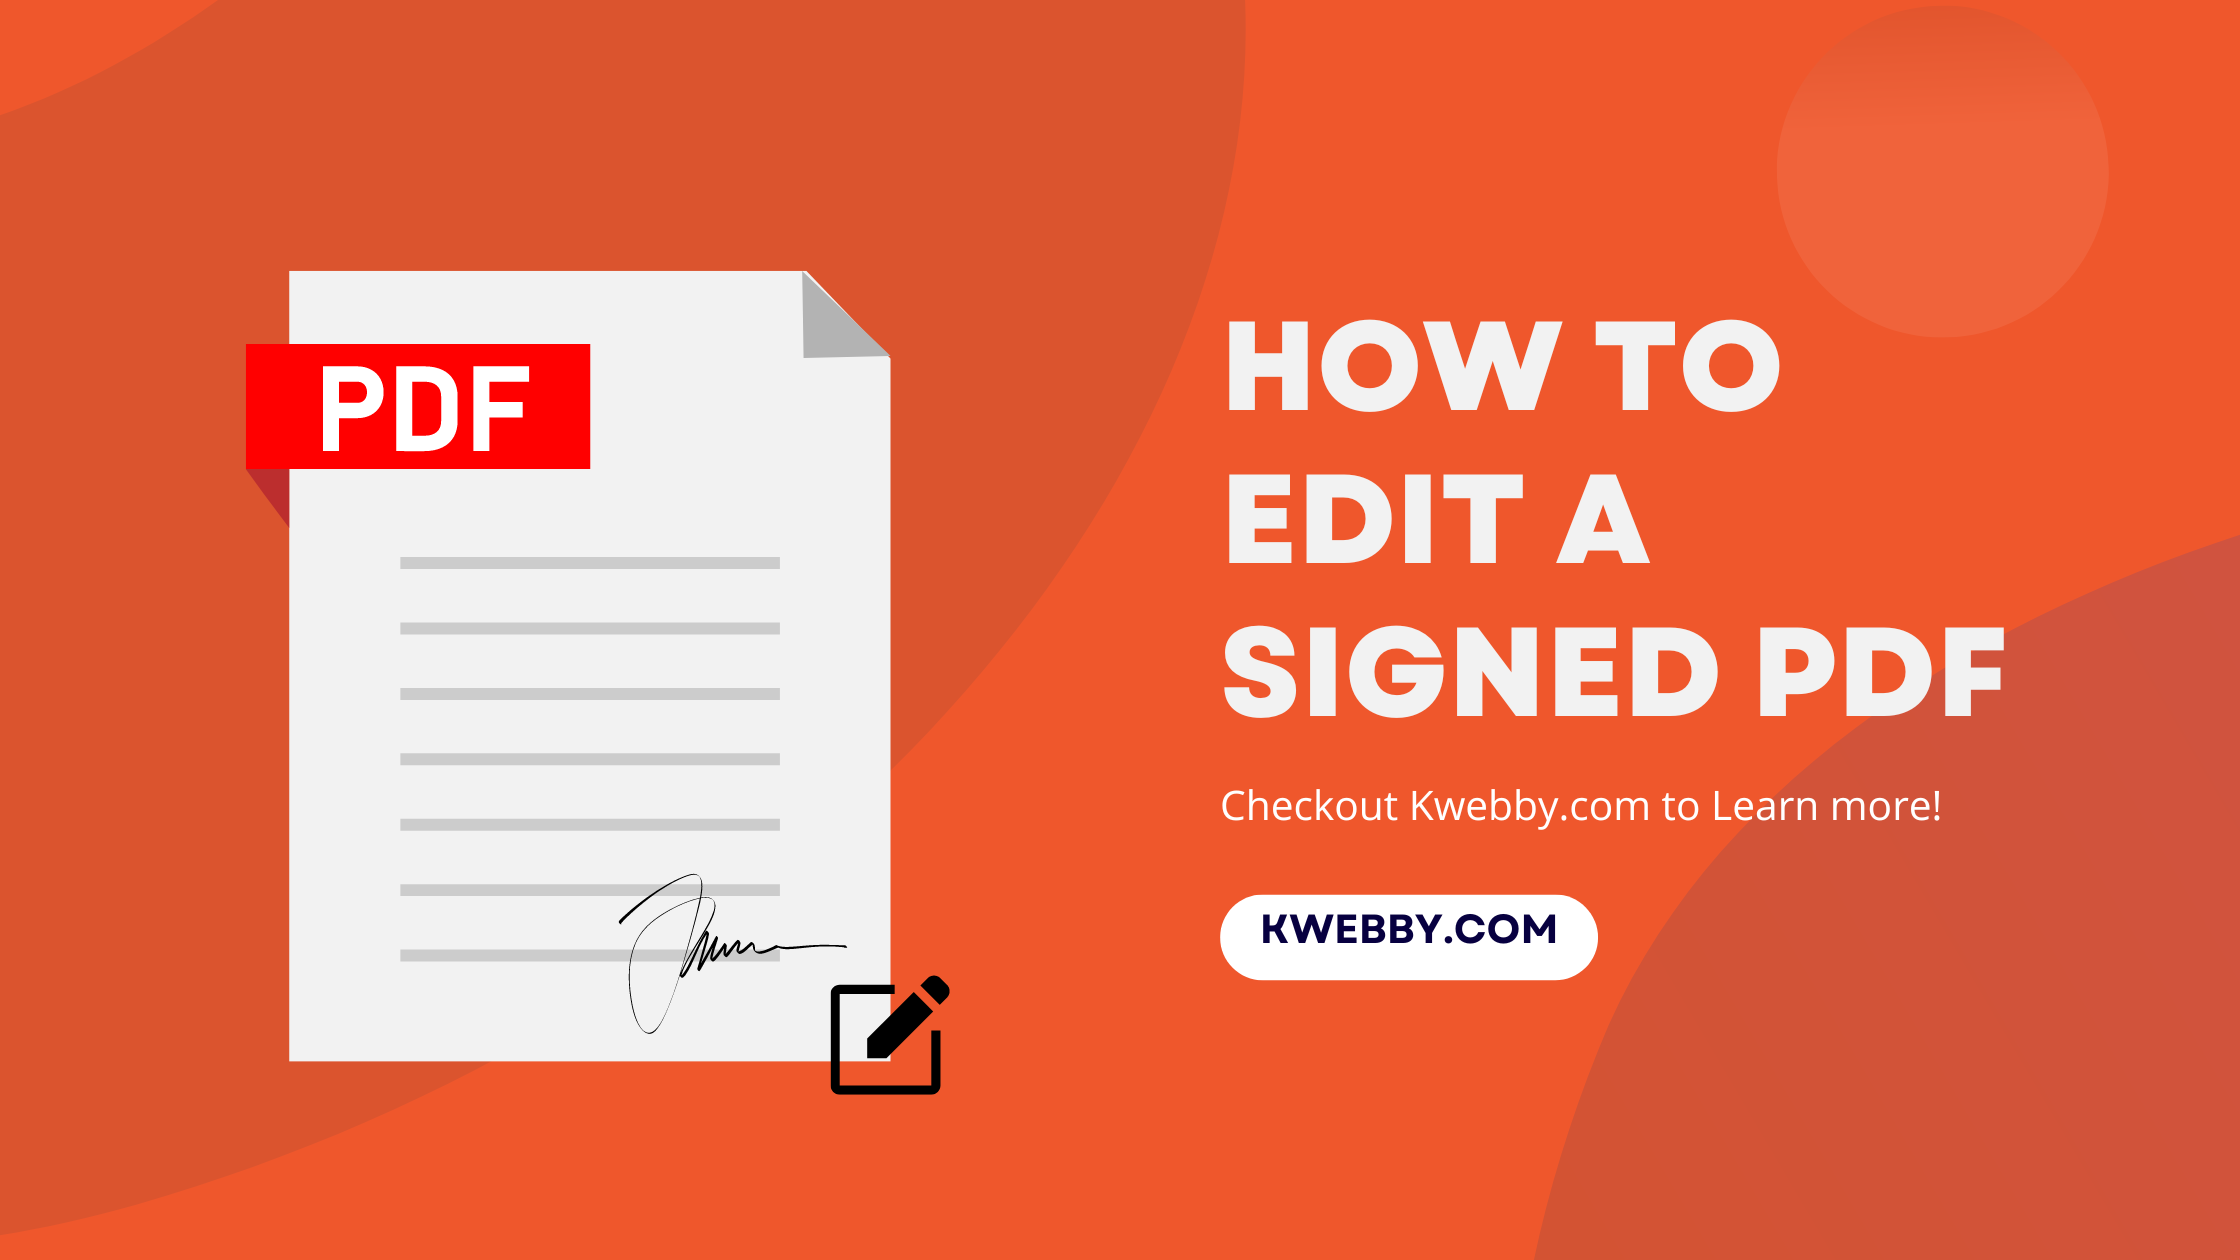 How to edit a signed PDF